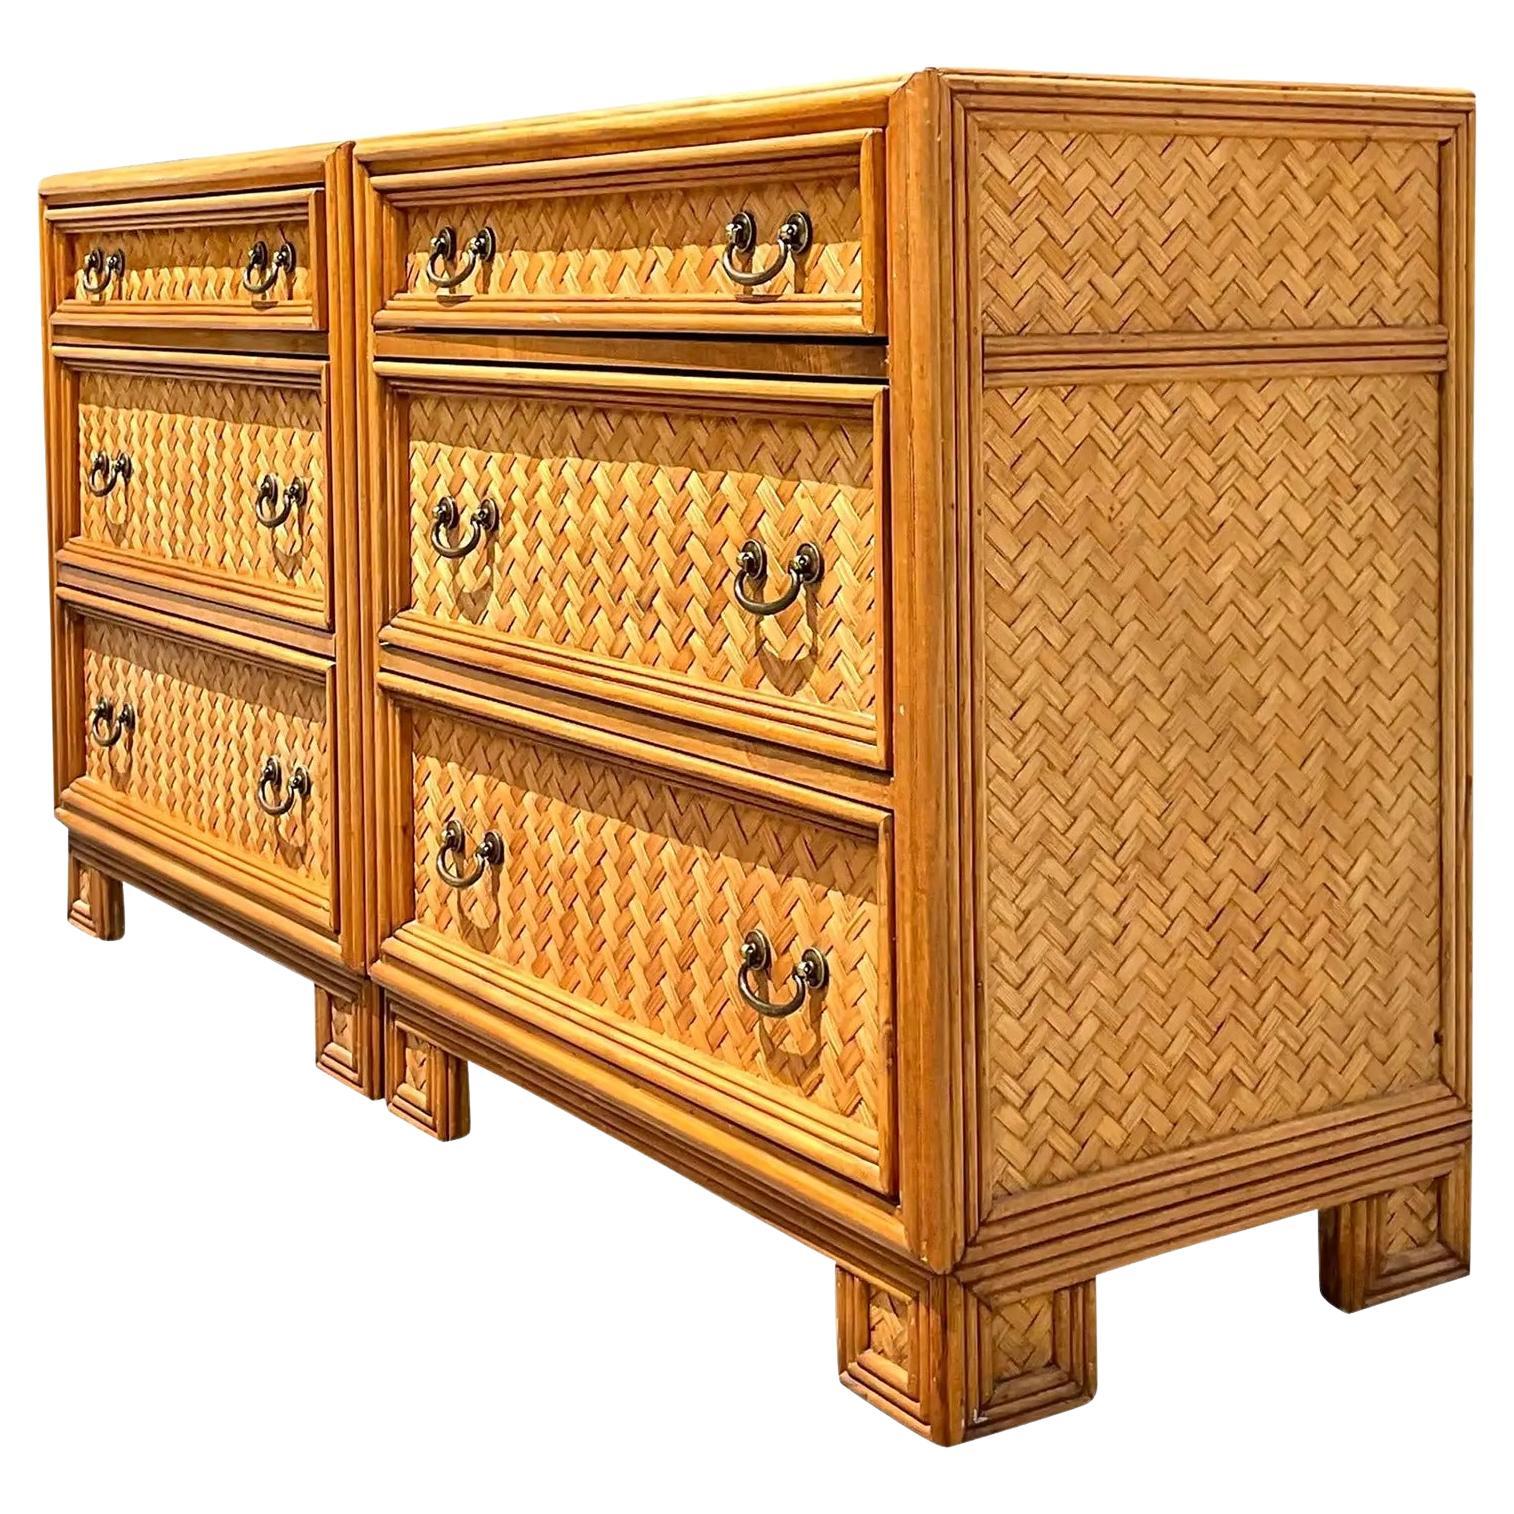 Vintage Coastal Woven Rattan Chest of Drawers, a Pair